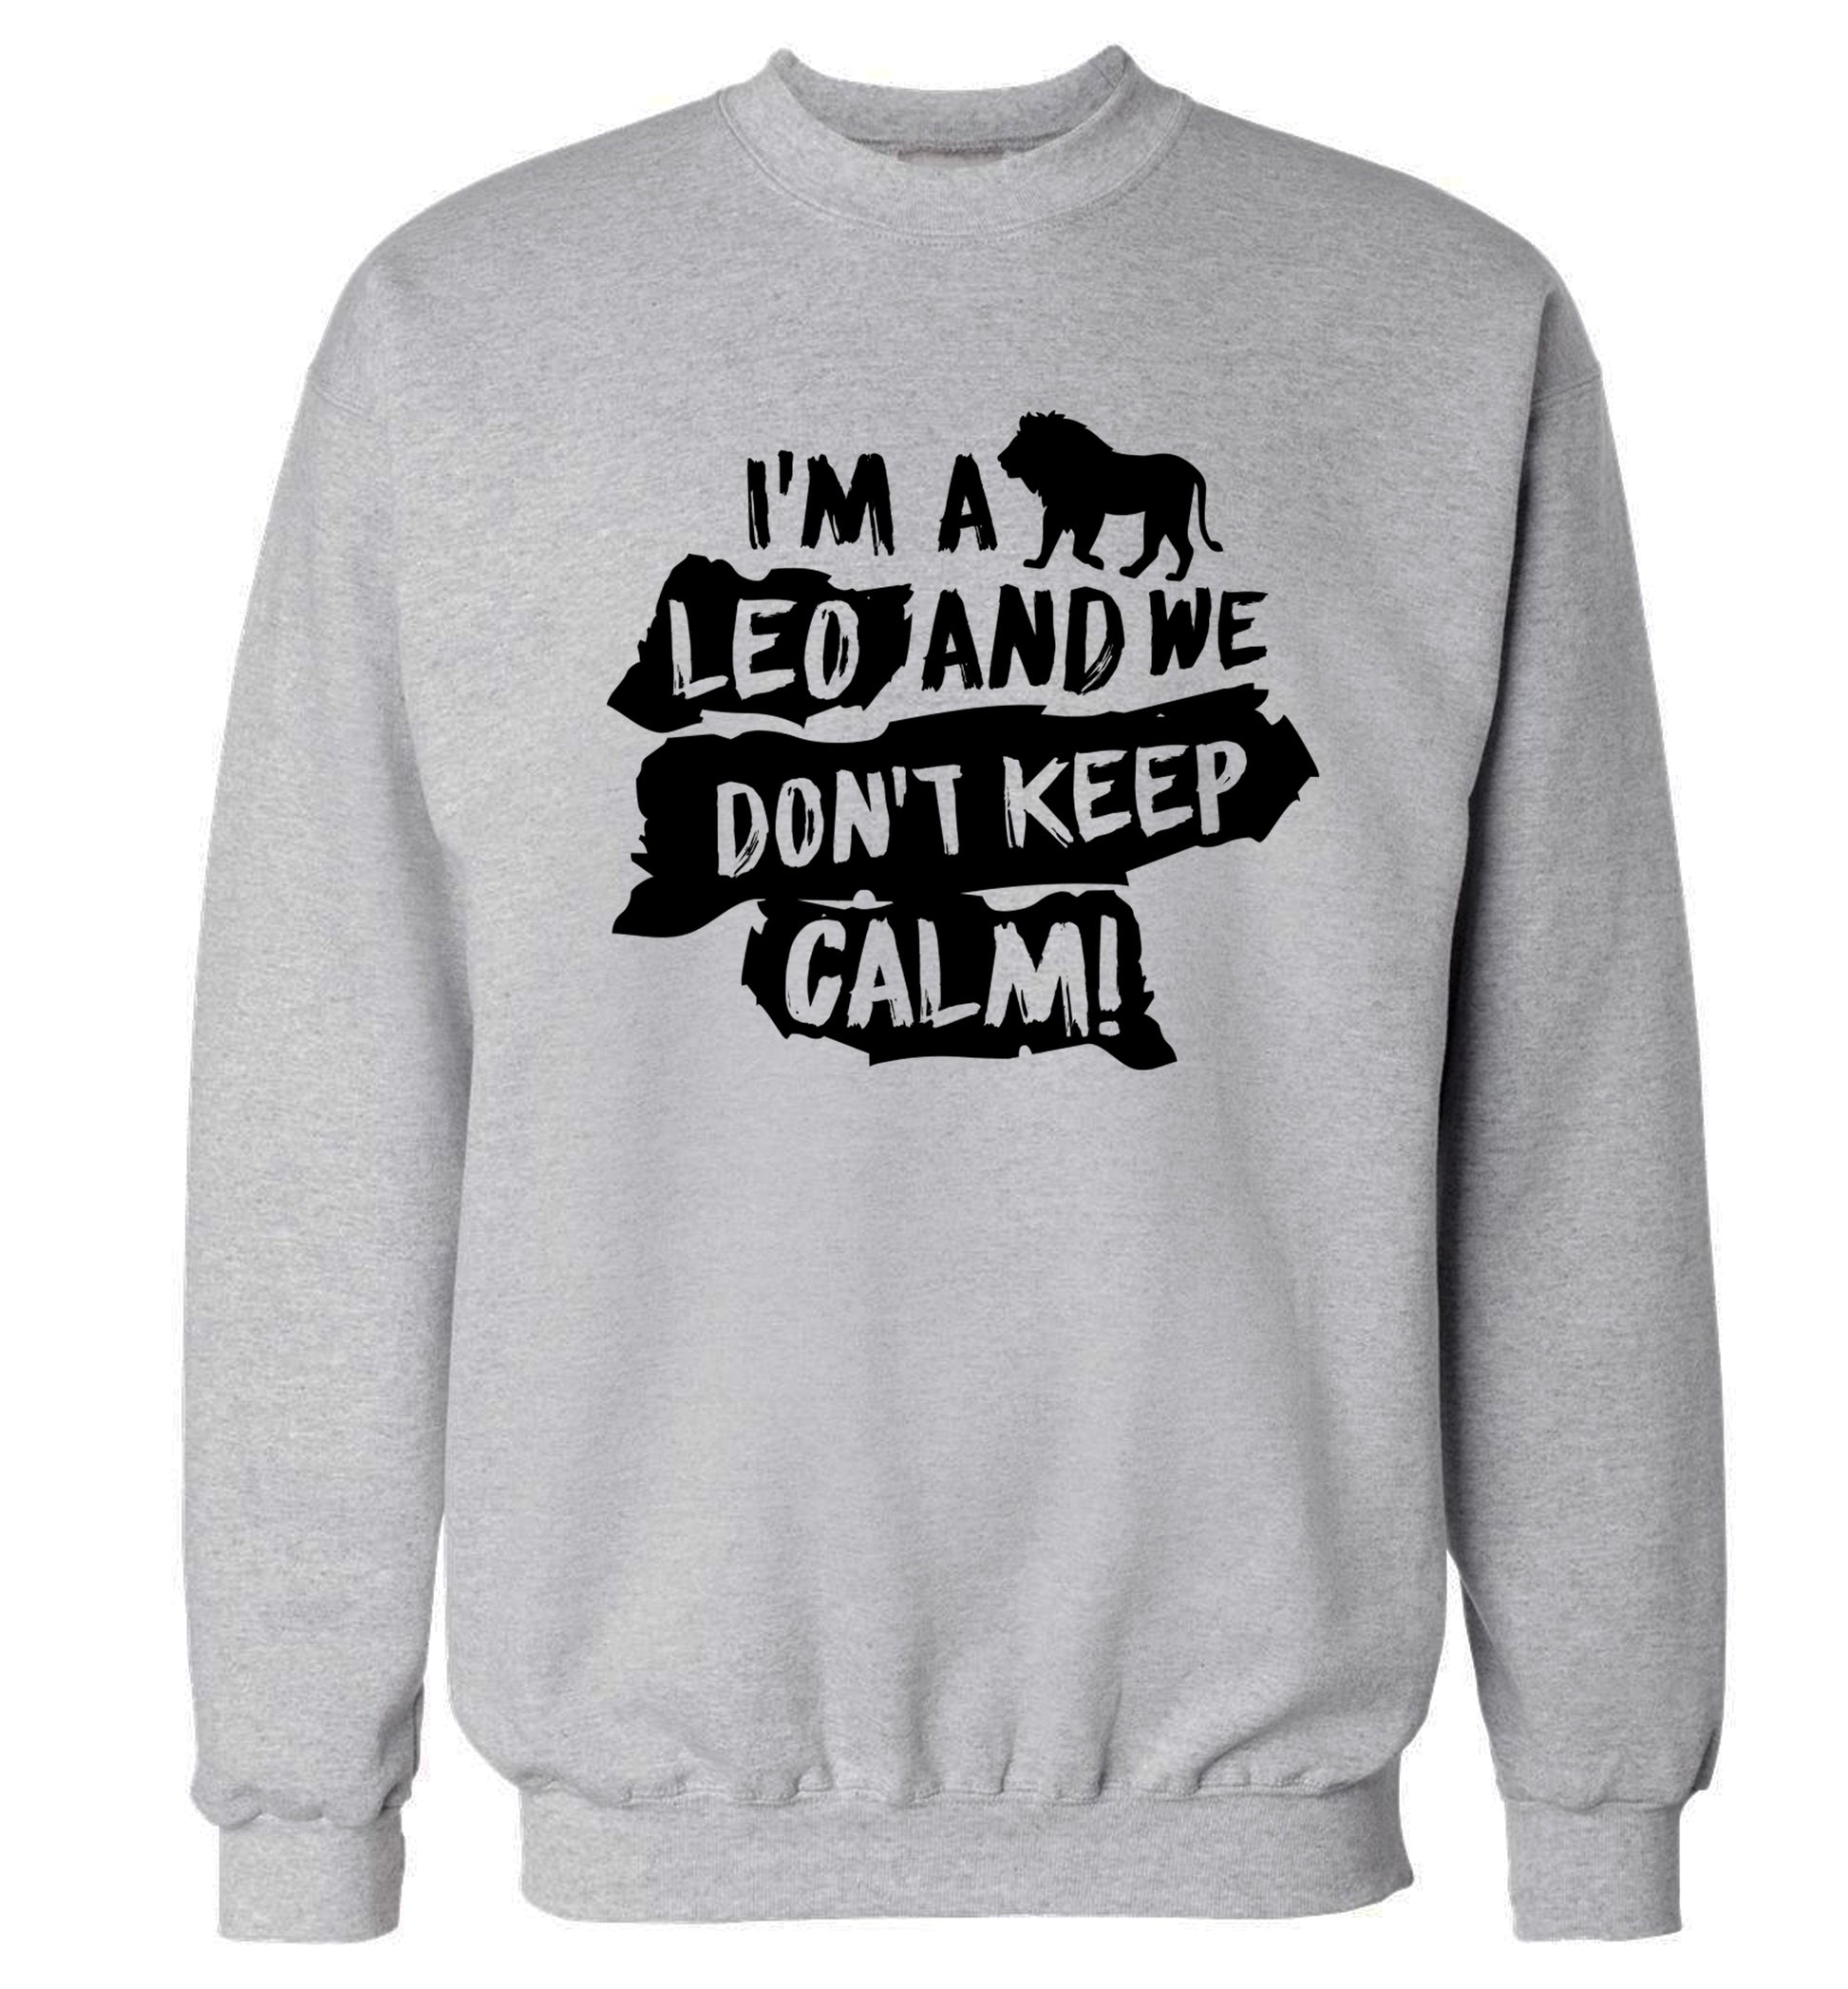 I'm a leo and we don't keep calm! Adult's unisex grey Sweater 2XL